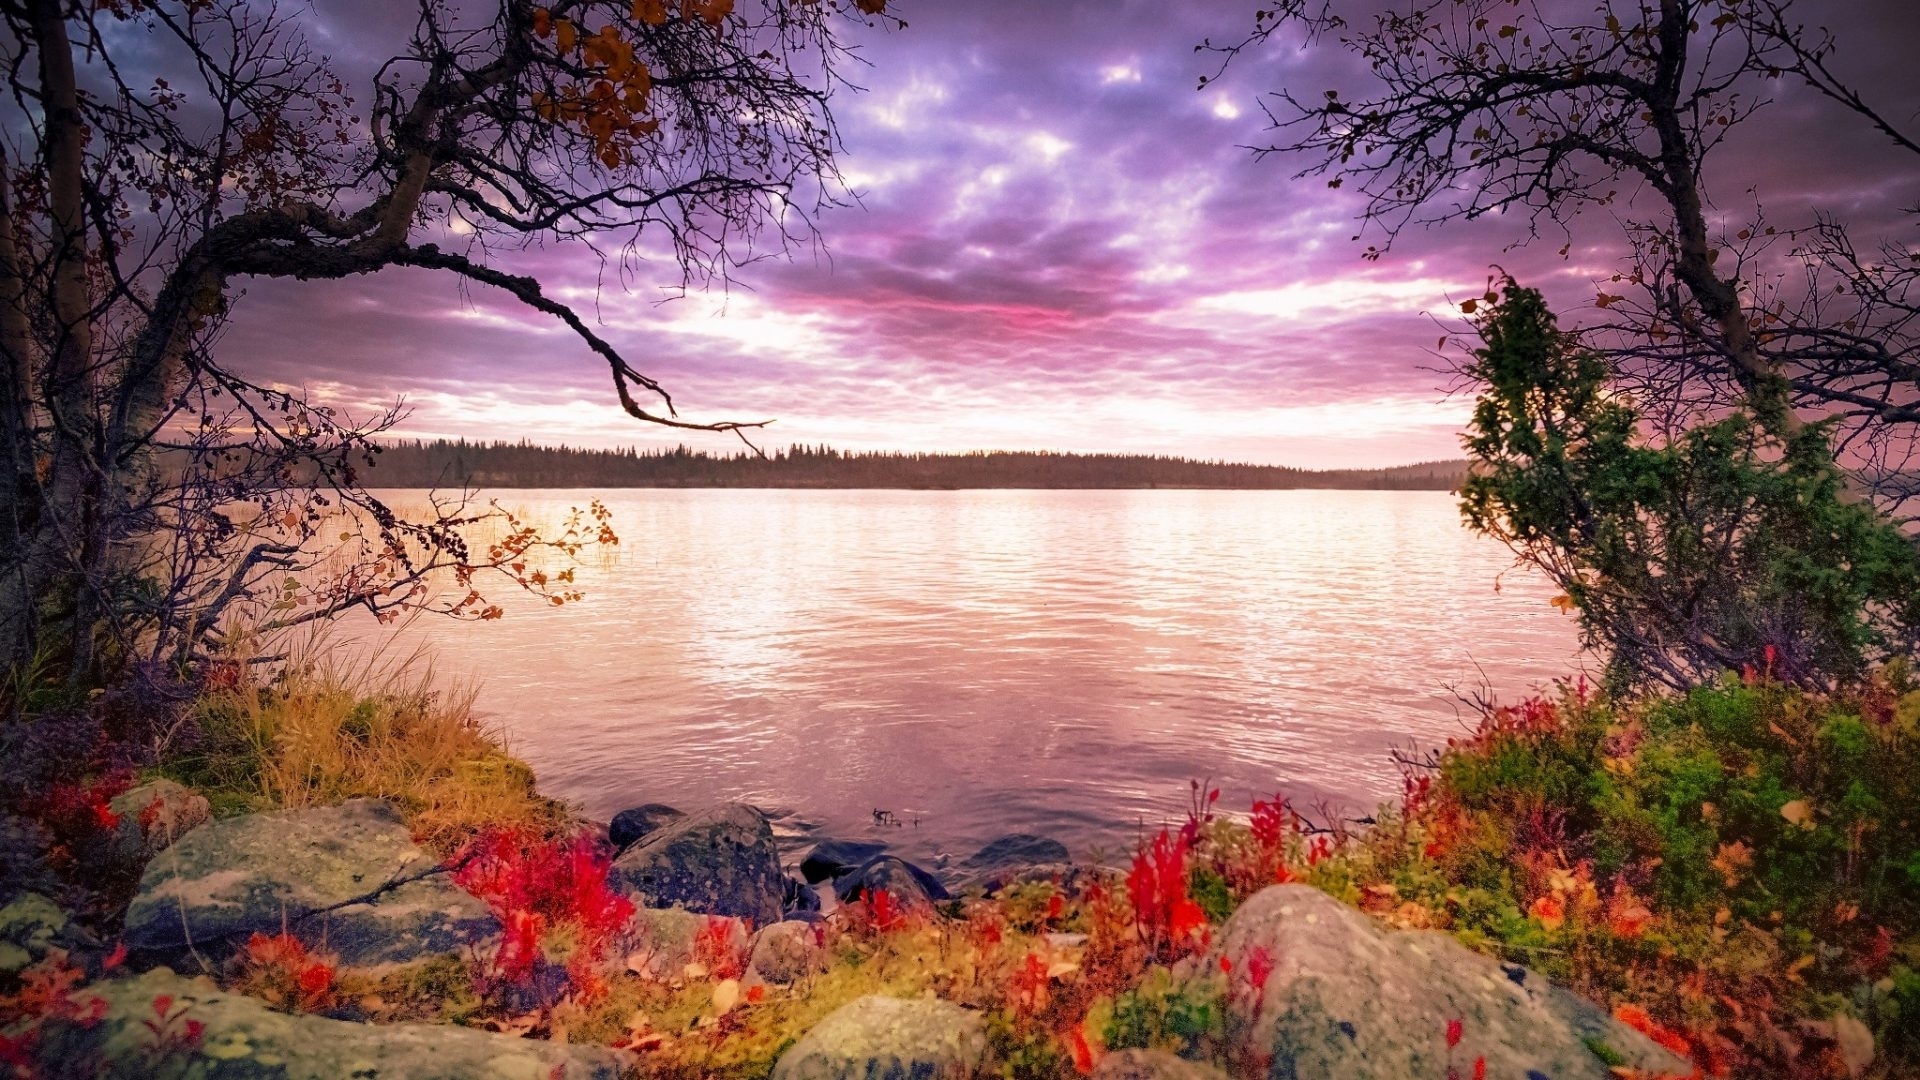 Wallpaper id image orange background clouds cenario nice stones scenario wallpaper reflection early sky trees panorama water tranquil cool purple awesome violet great landscape fall red scenic autumn brown x